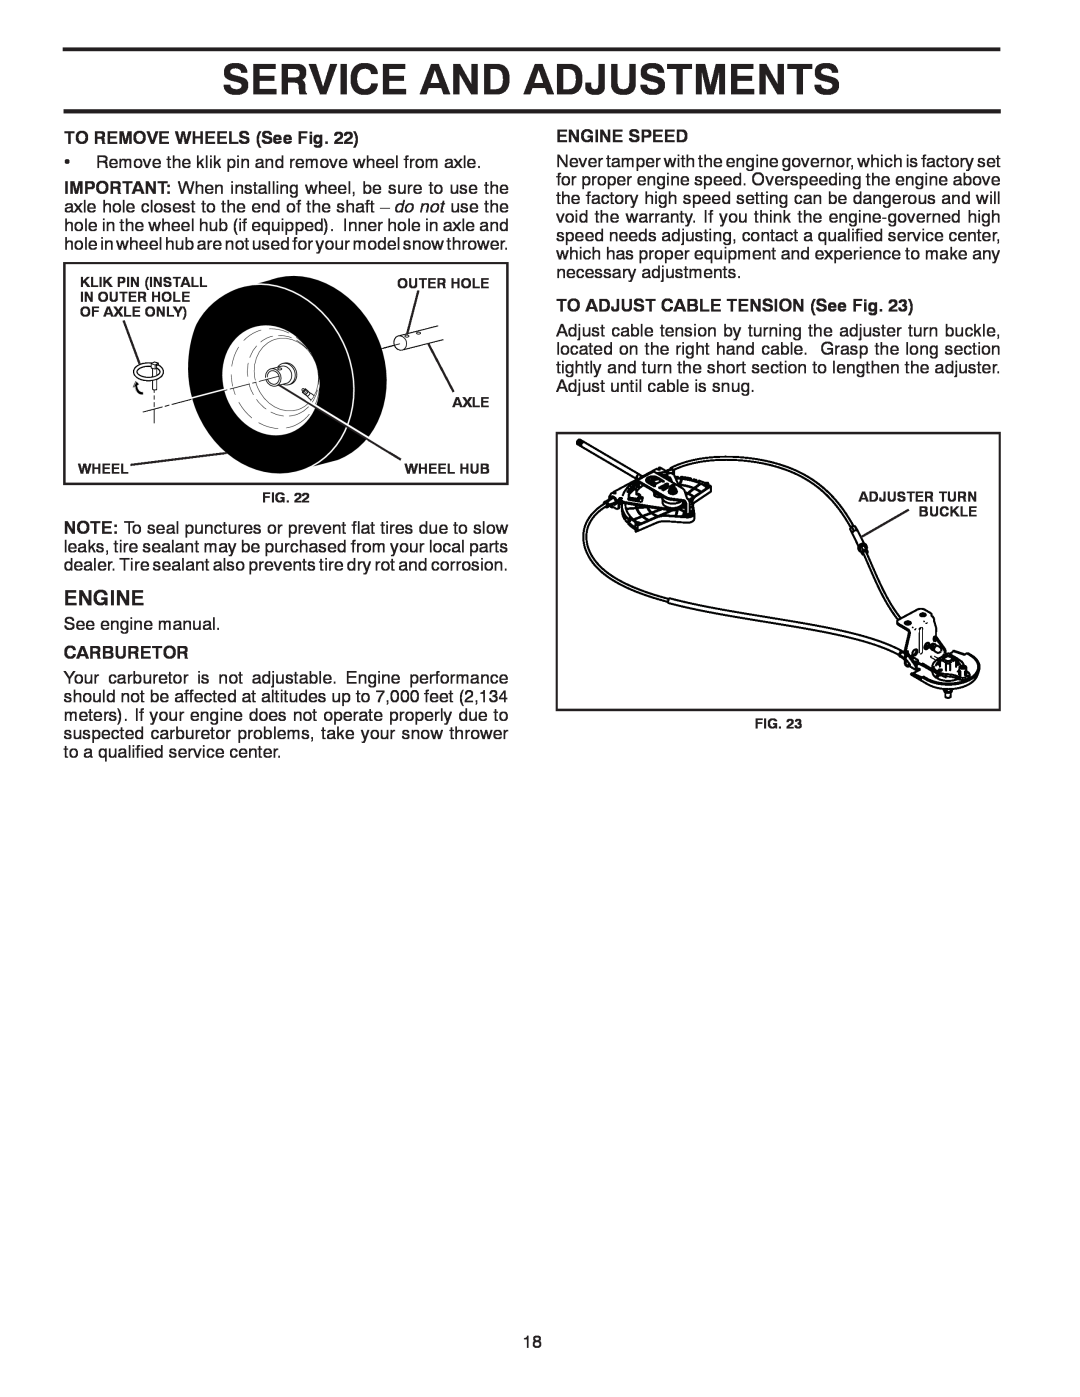 Poulan 429264, 96198003301 owner manual Service And Adjustments, TO REMOVE WHEELS See Fig, Carburetor, Engine Speed 